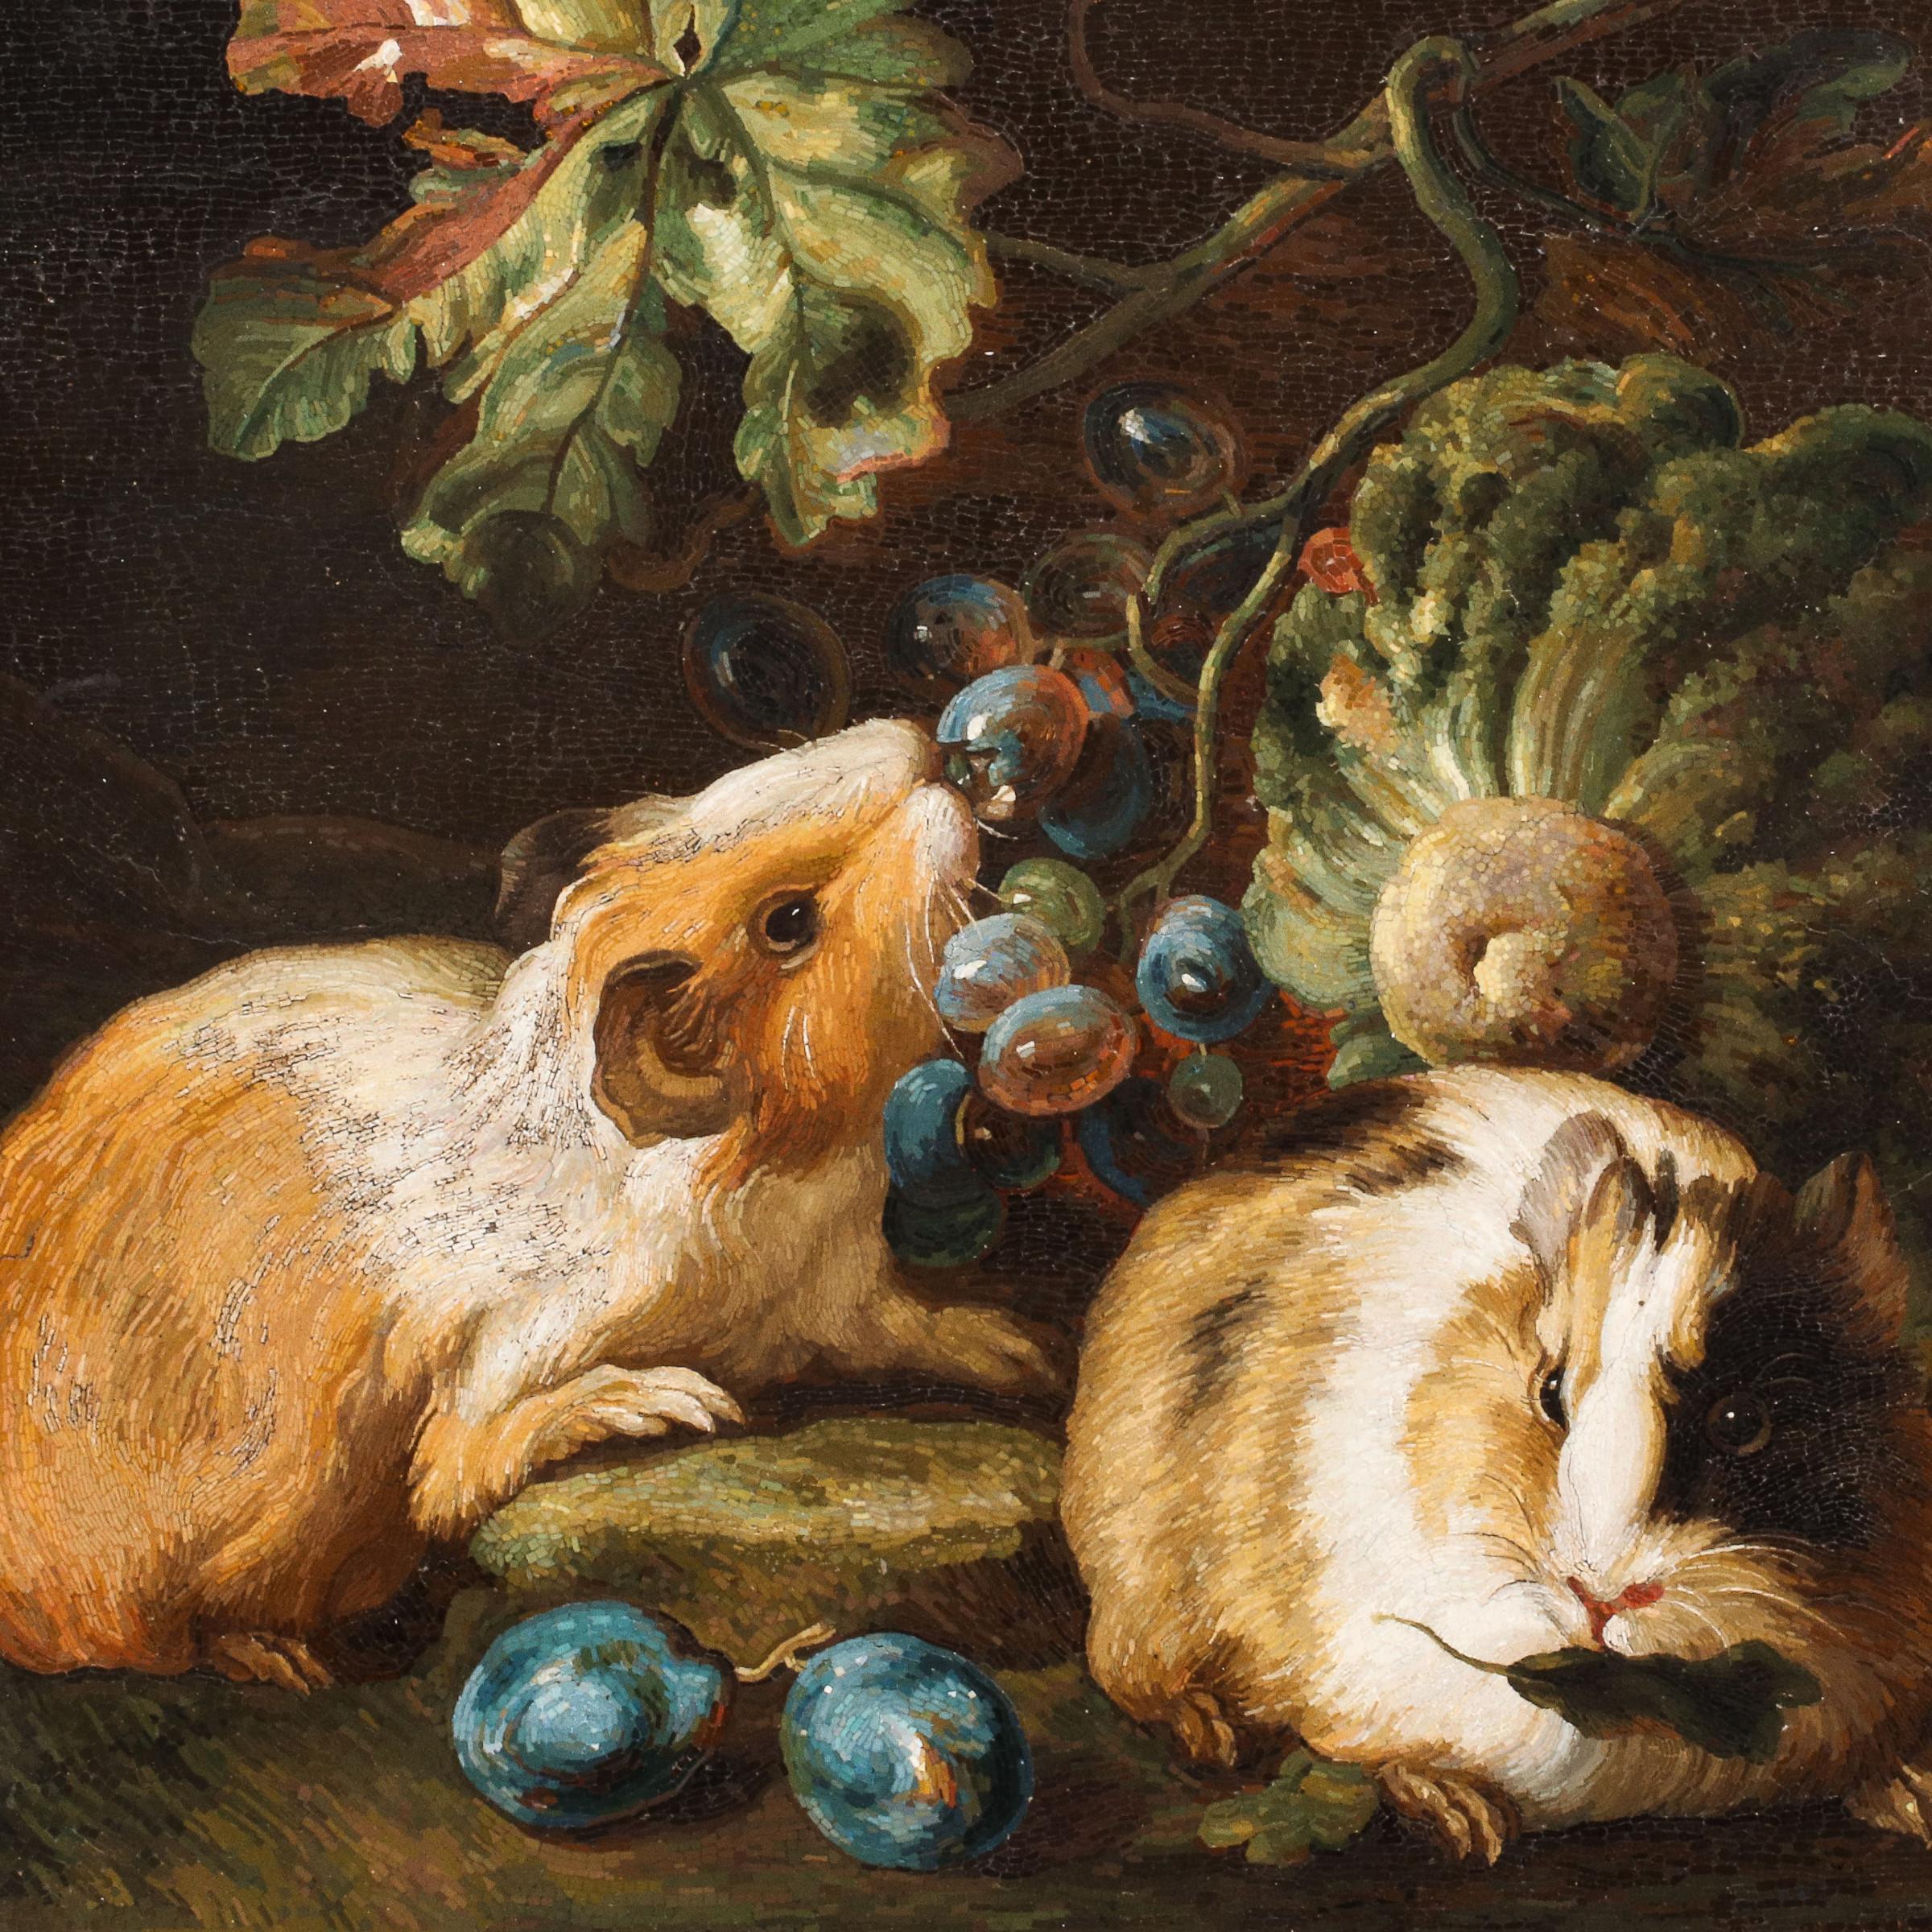 19th Century Important Micromosaic of Two Guinea Pigs Eating Cabbage and Grapes